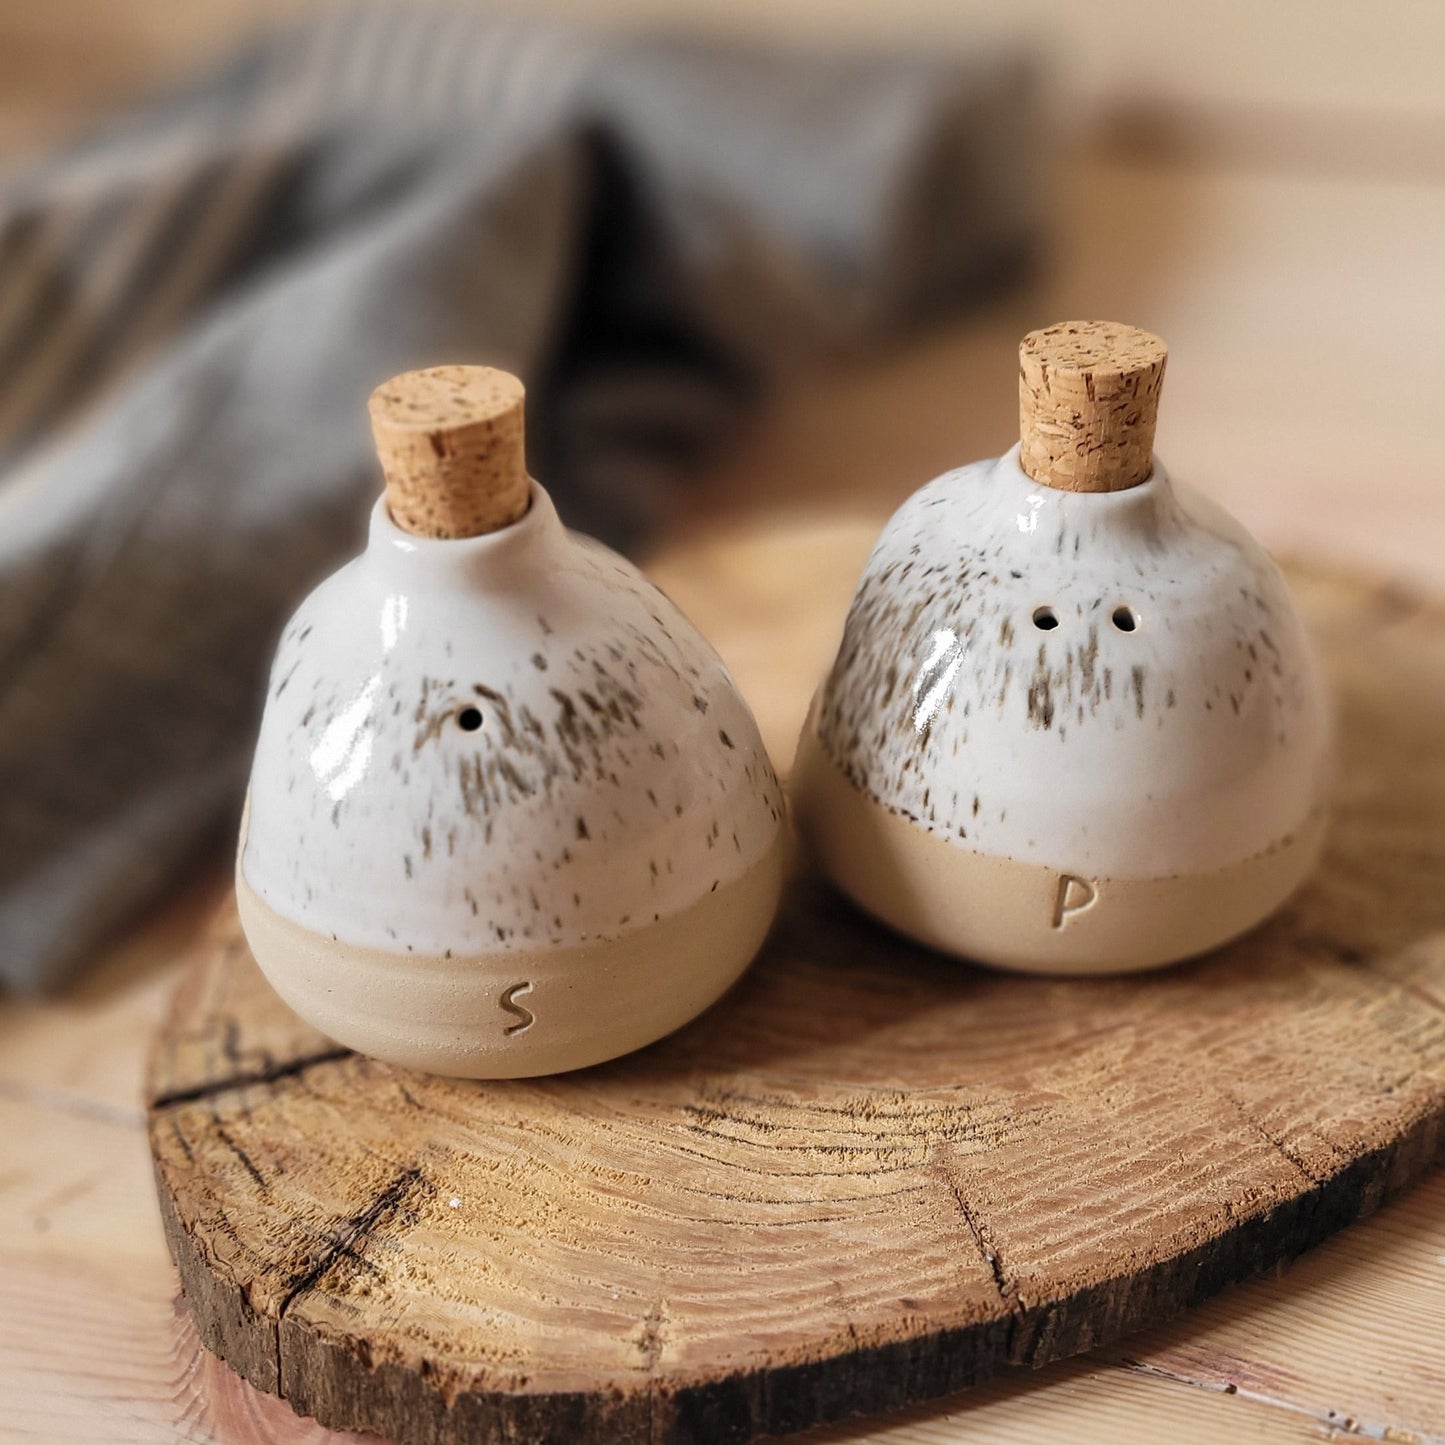 Spice Up Your Kitchen: Rustic pottery salt & pepper shakers. Enhance your table setting.